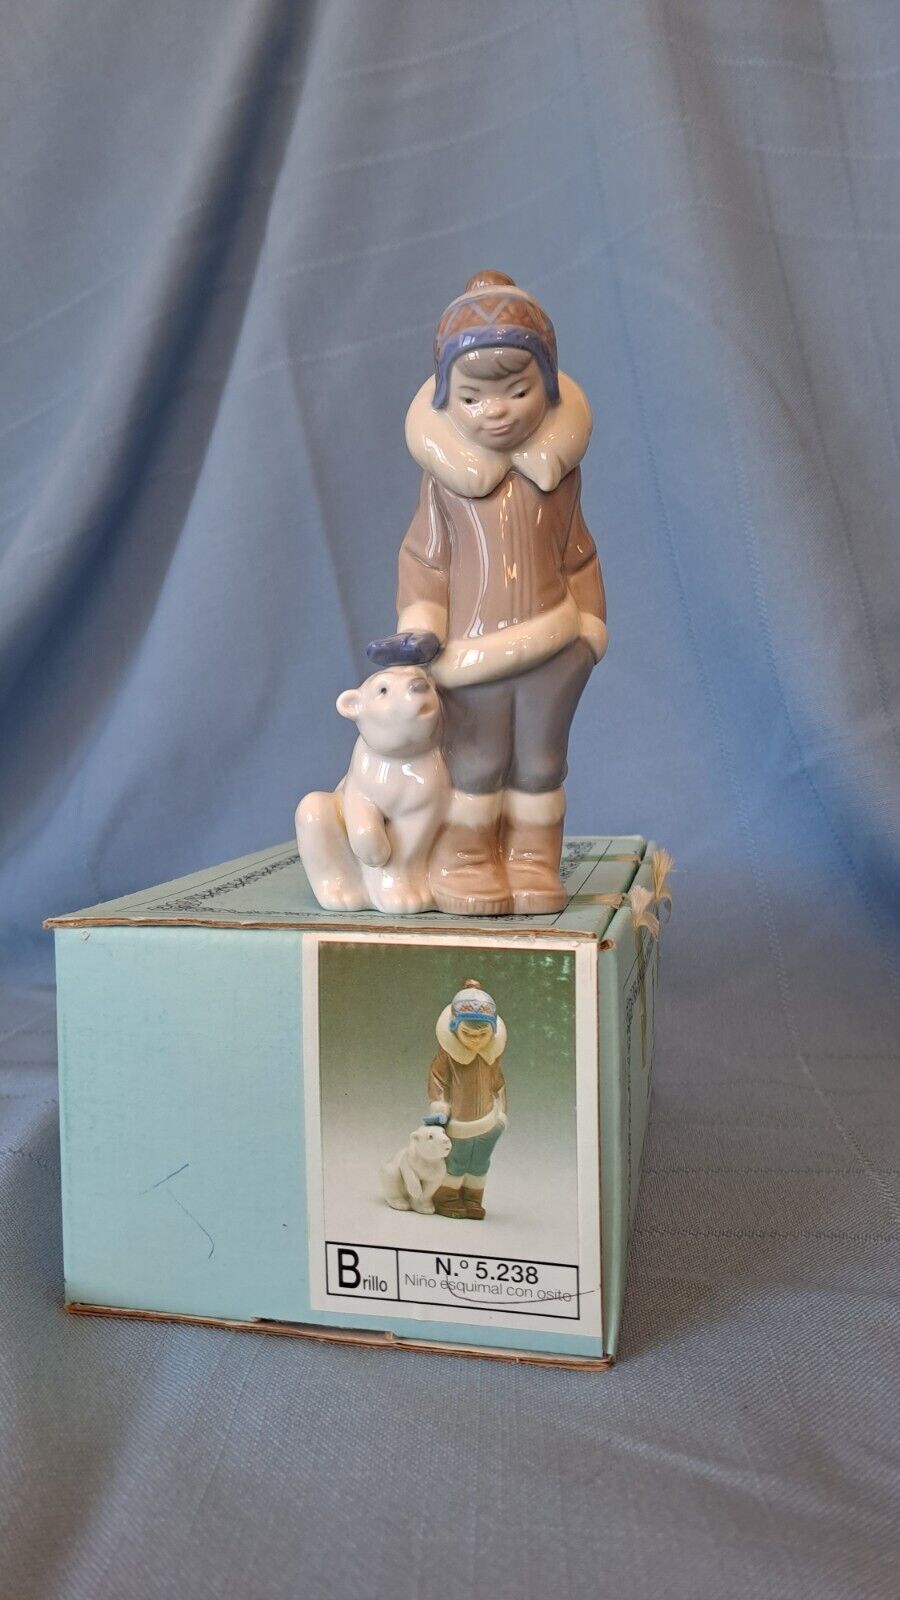 Lladro Eskimo Boy with Bear 5283, comes with box (used) - Excellent condition